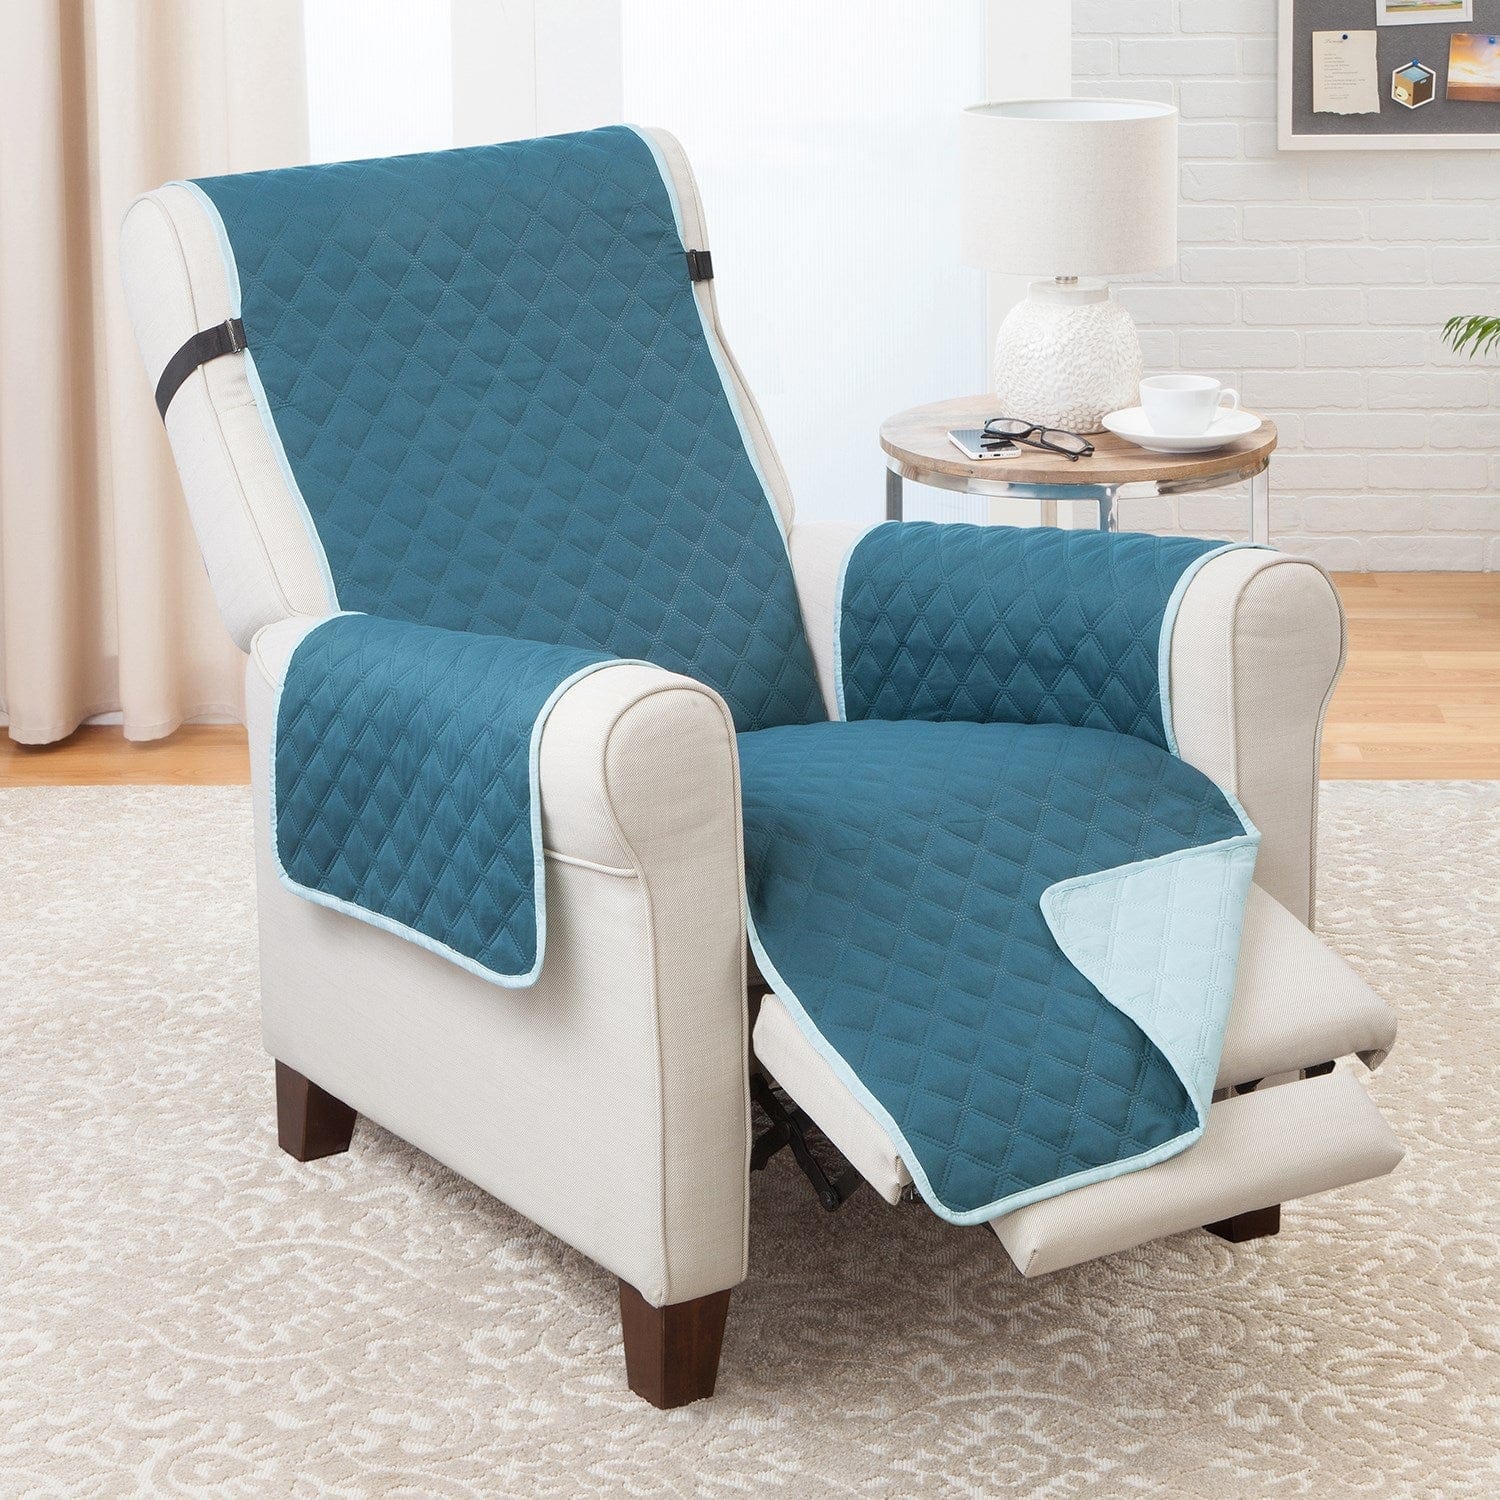 Extra Large Quilted Recliner Protector With Pockets